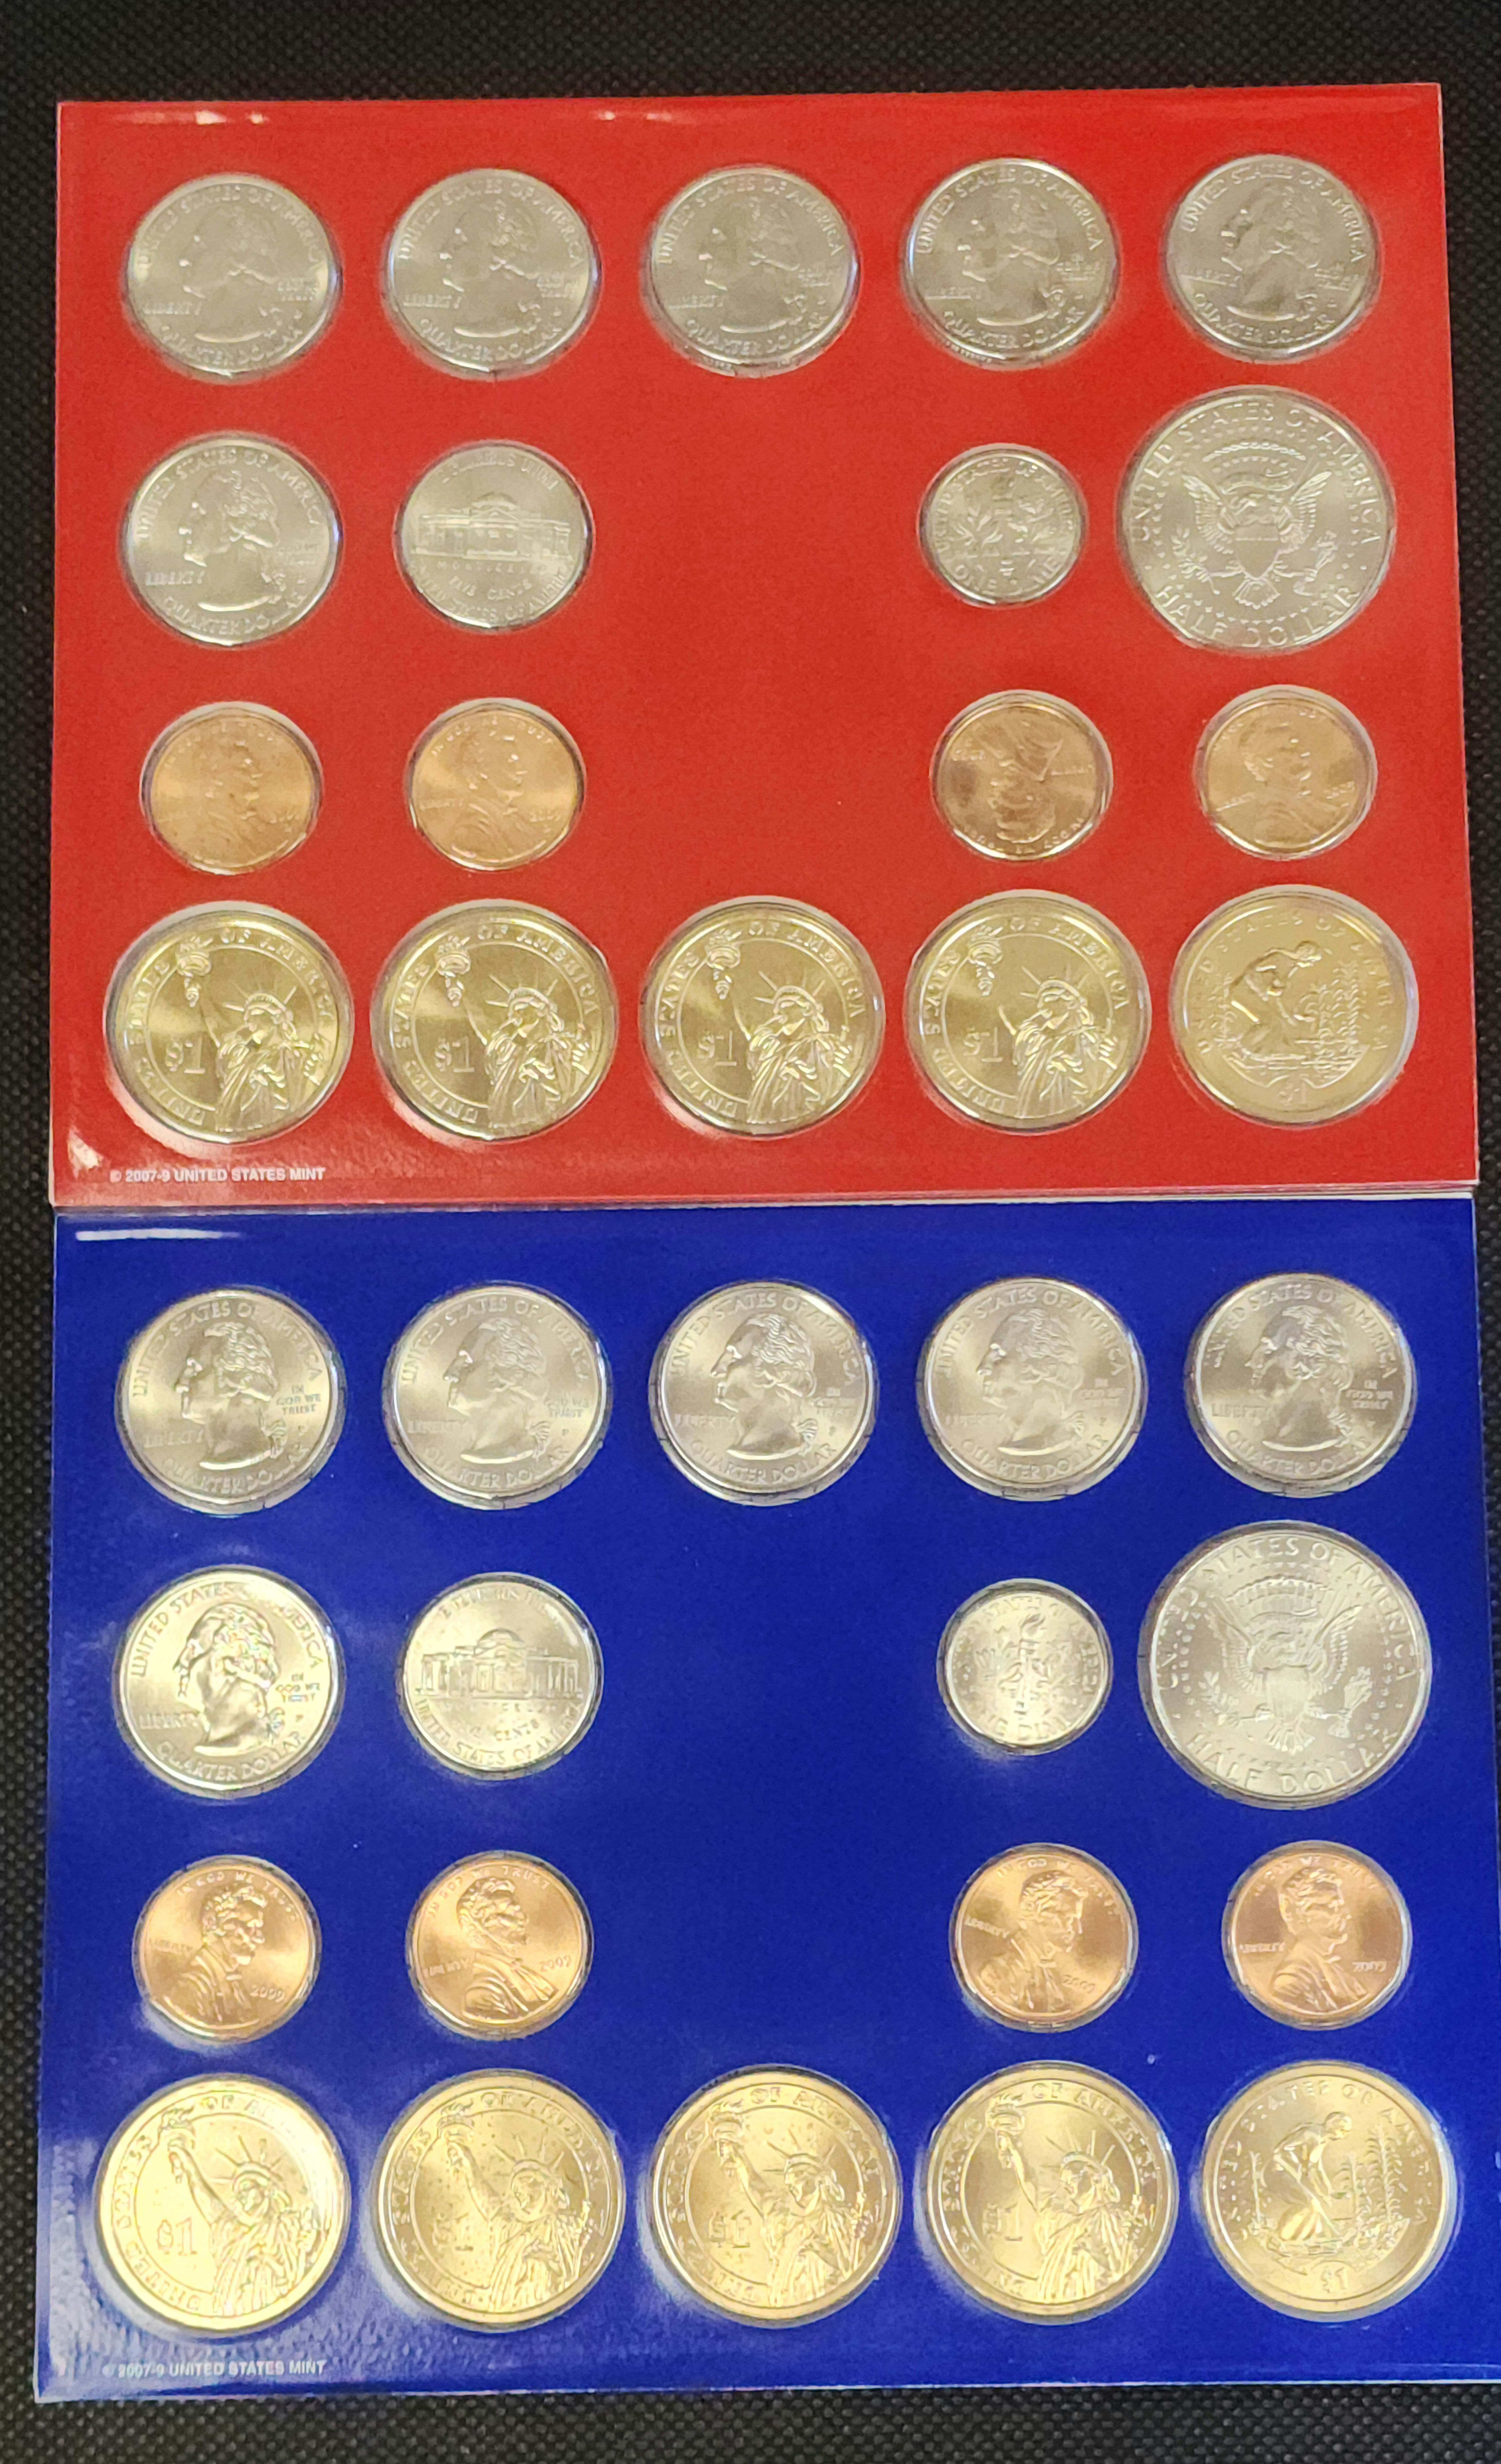 2009 United States Mint Uncirculated Coin Set